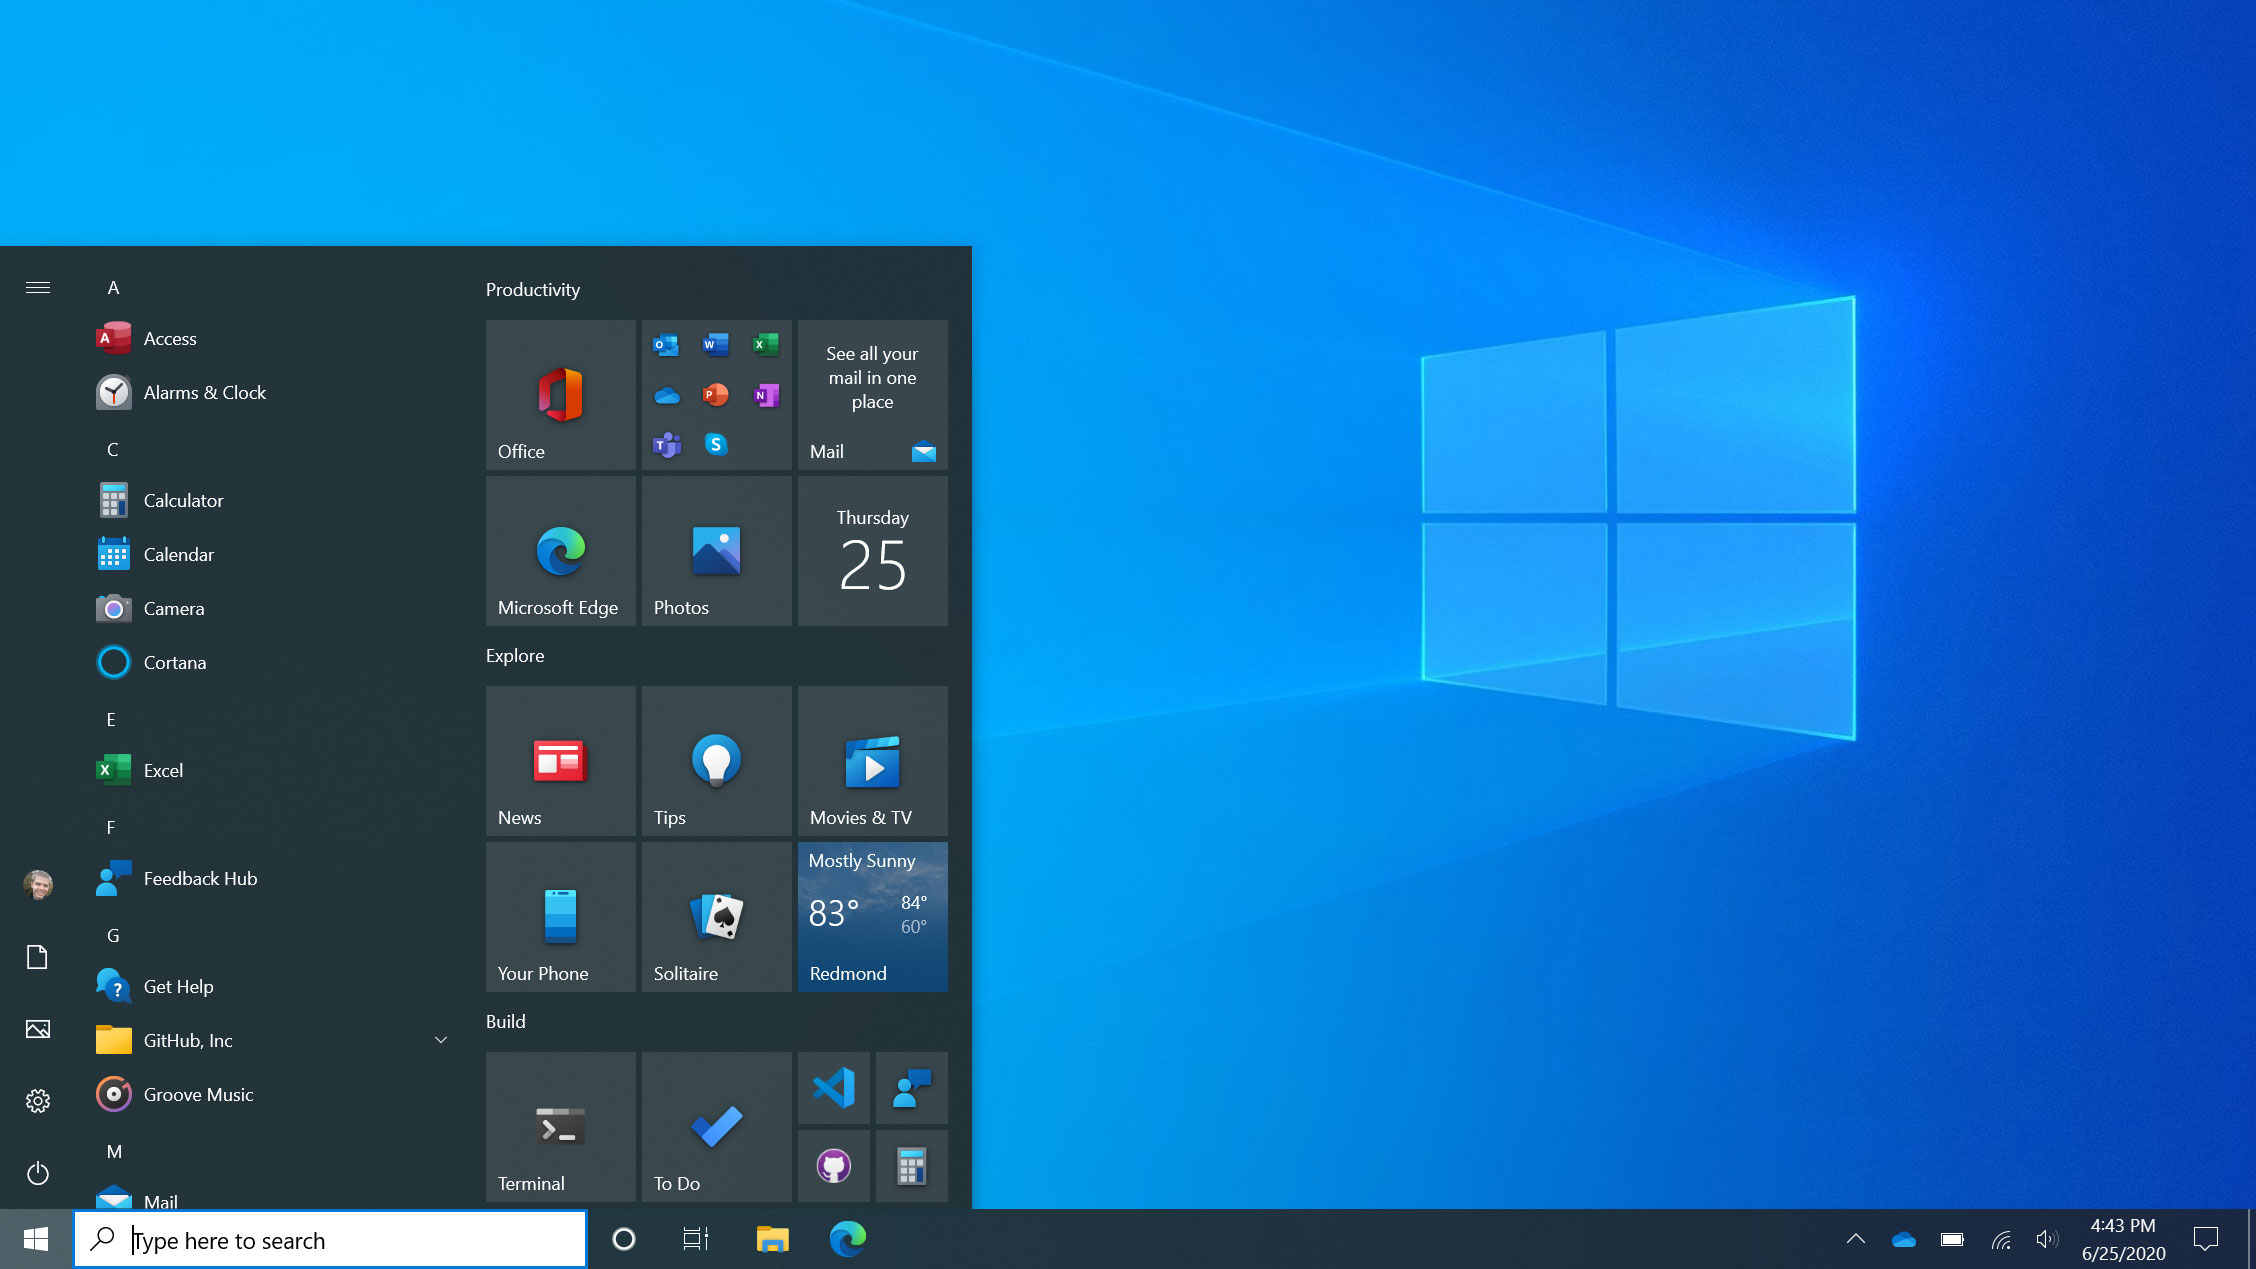 How To Make Windows 11 Look And Feel More Like Windows 10 | Laptop Mag